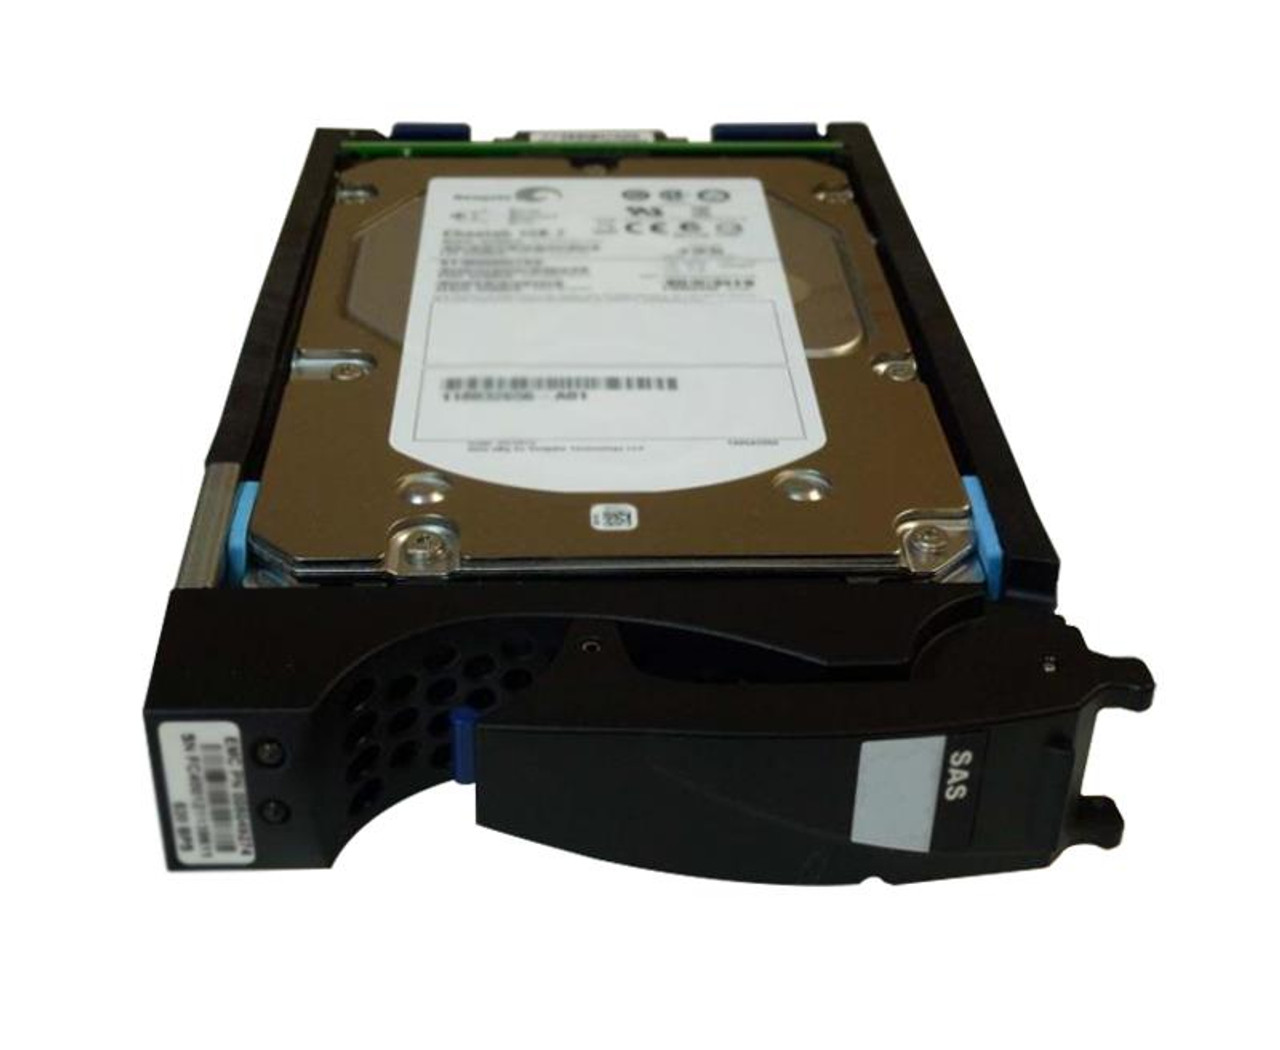 005048749 EMC 146GB 15000RPM Fibre Channel 4Gbps 16MB Cache 3.5-inch Internal Hard Drive for CLARiiON CX Series Storage Systems